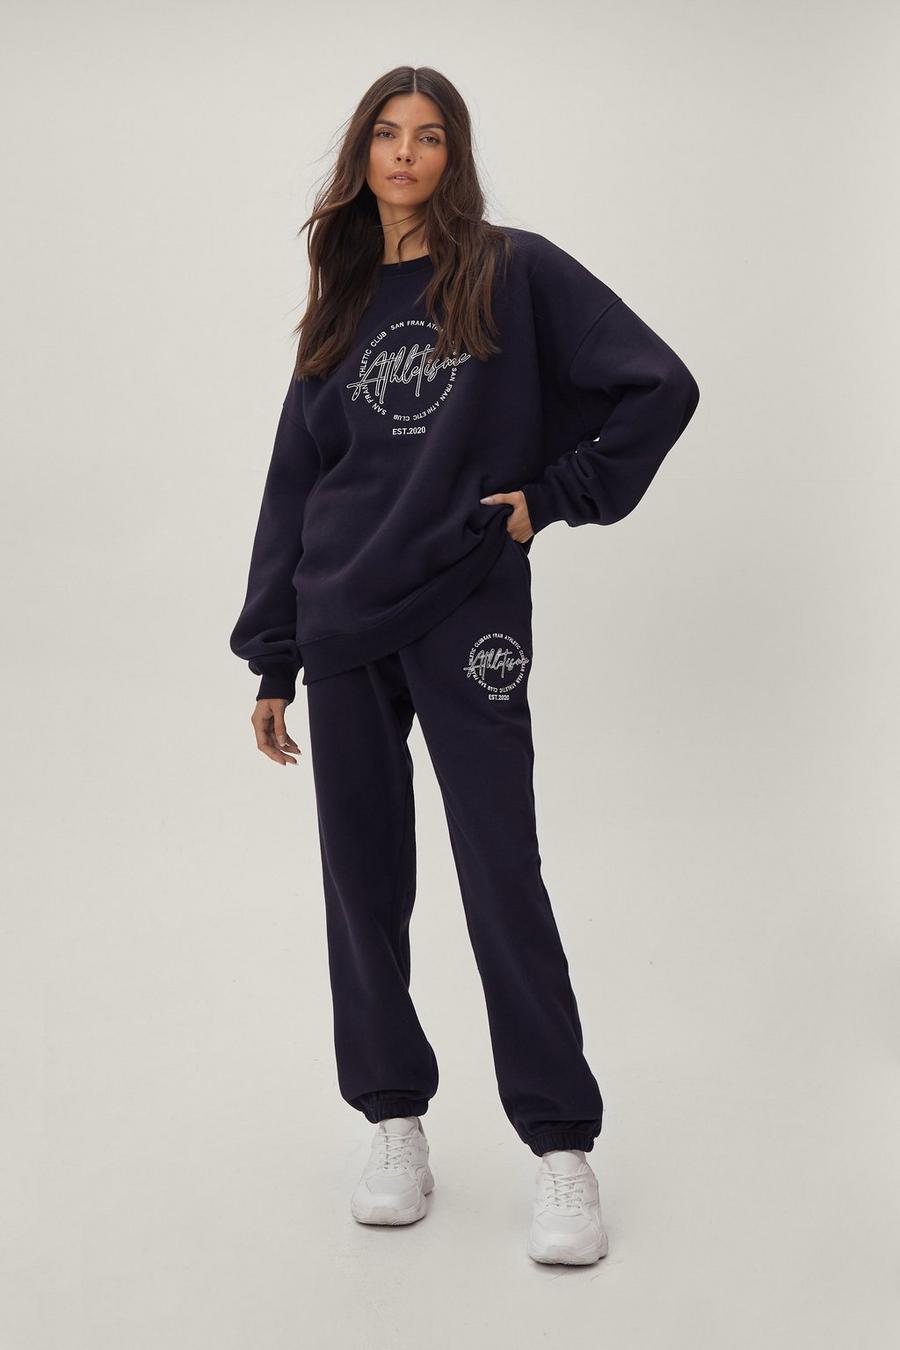 Embroidered Circle Athletisme Relaxed Sweatpants